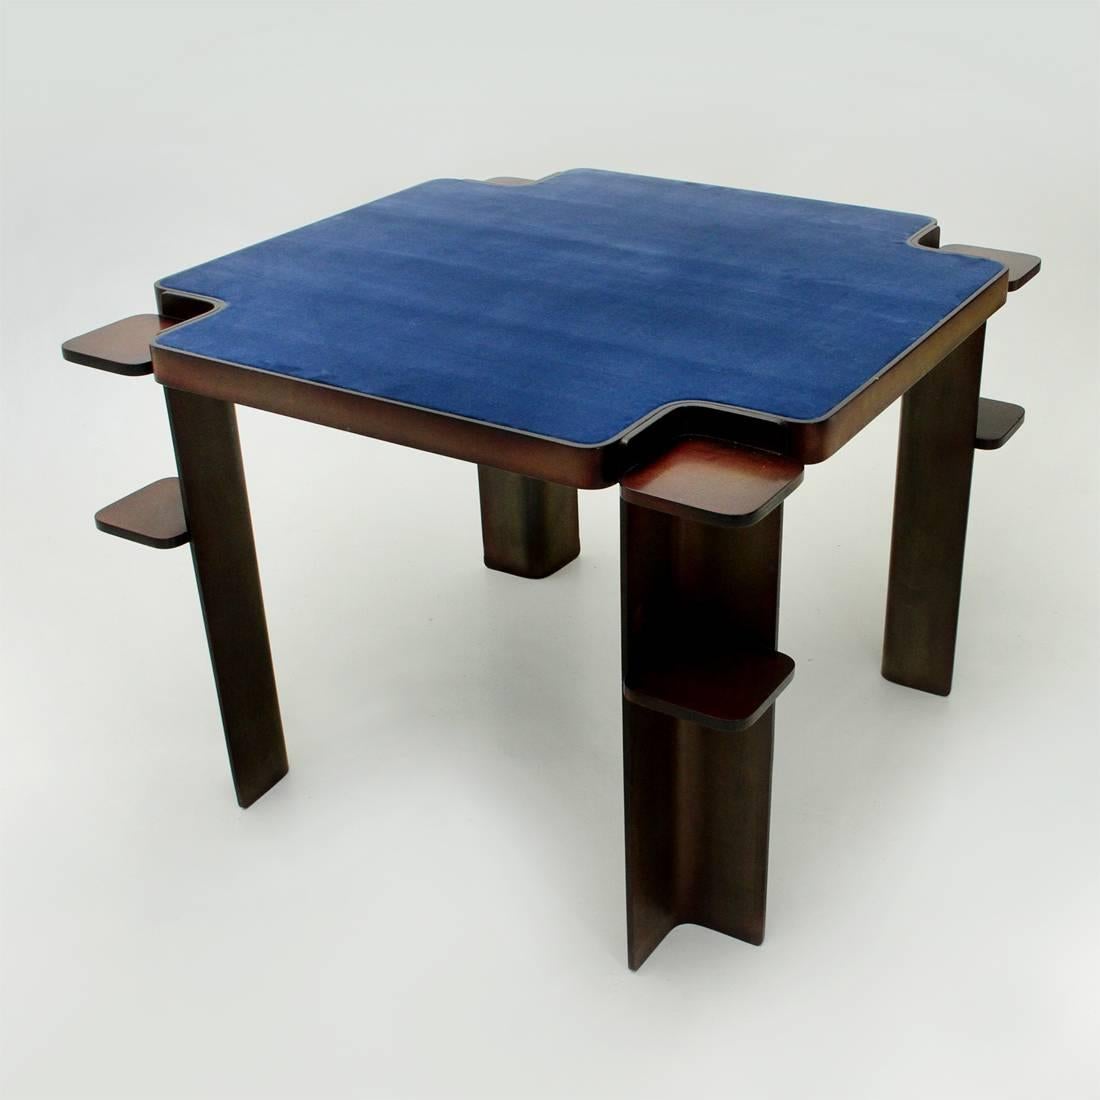 Italian game table produced by Cini & Nils in the 1960s.
Top with curved plywood frame and top covered with new blue fabric.
Curved 90 ° plywood legs with two support shelves.
Structure in good condition, some signs due to normal use over